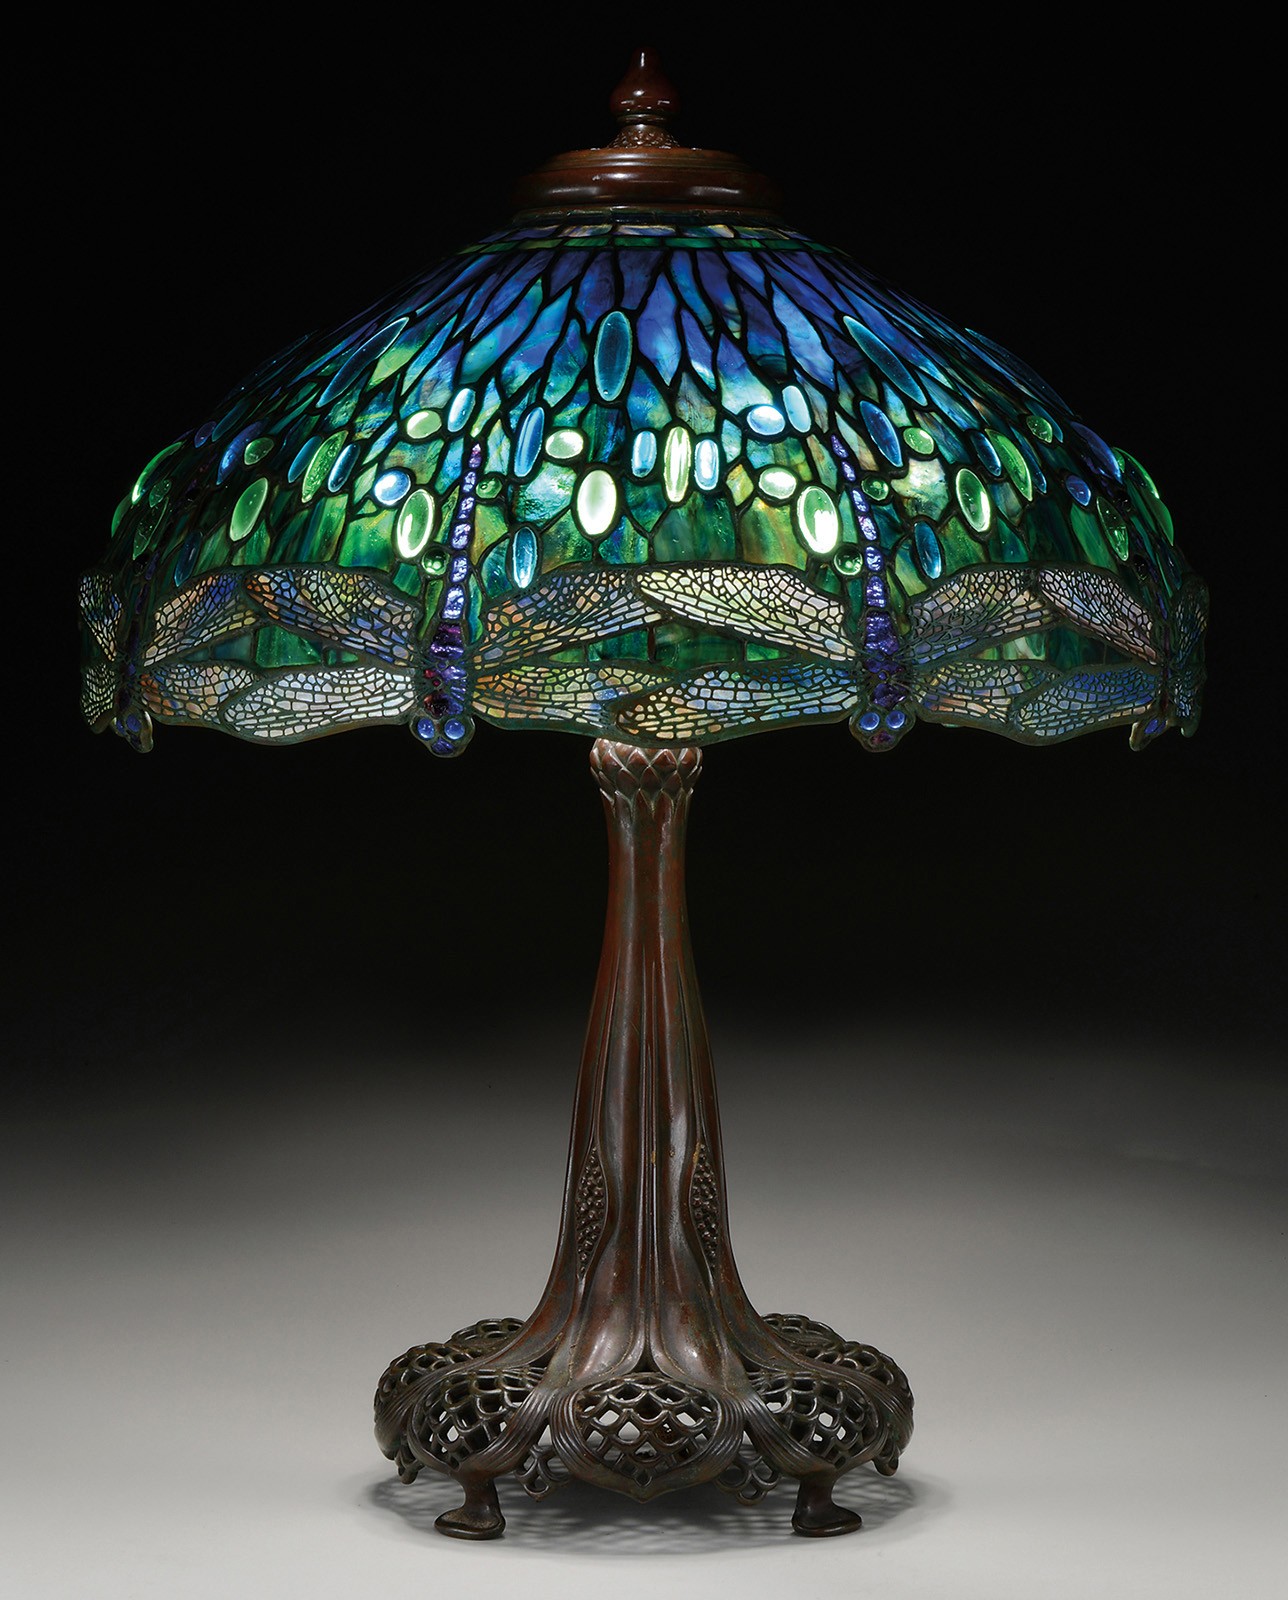 Tiffany studios dragonfly table lamp sells for more than